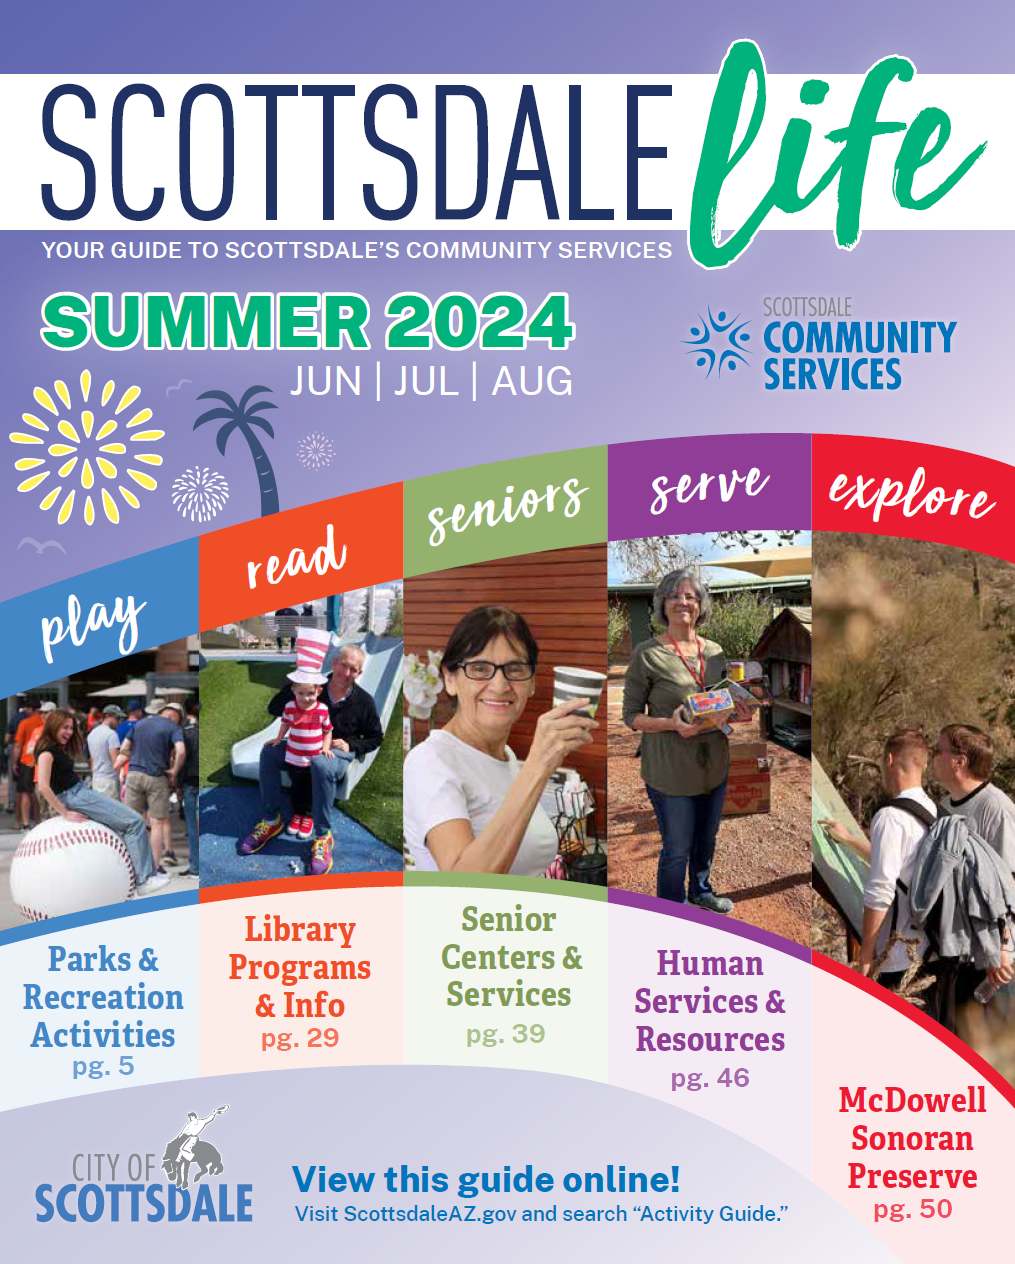 Download Spring 2022 Activity Guide